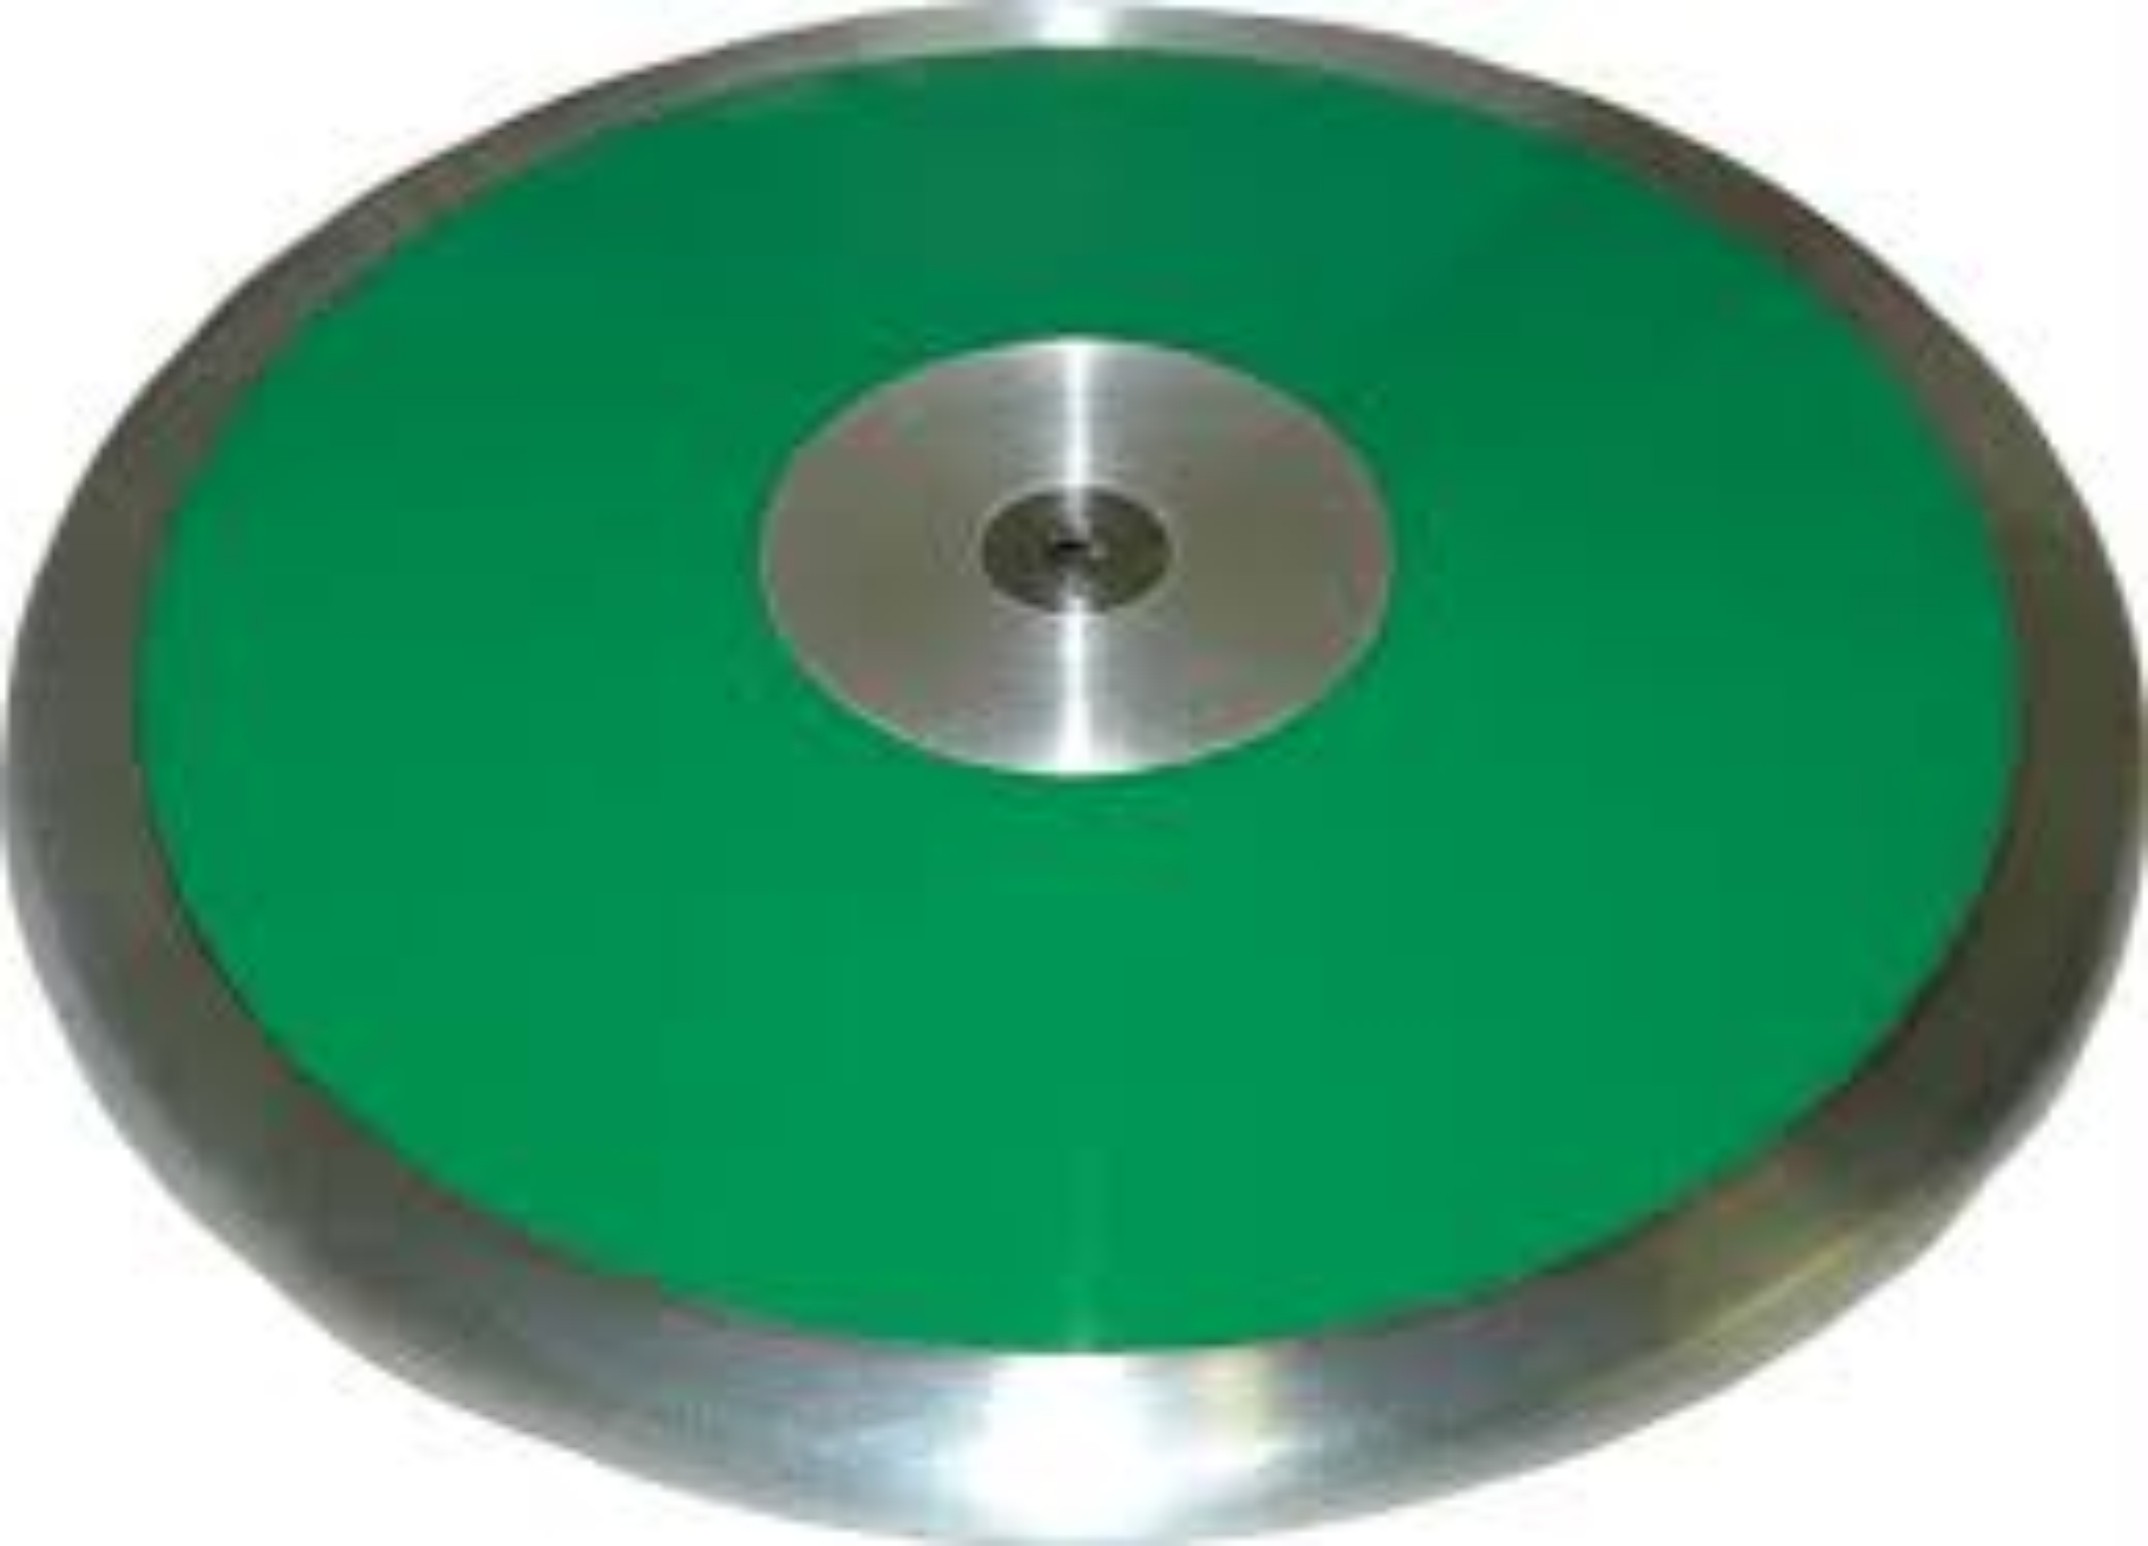 Training Plate Discus 70% Ring